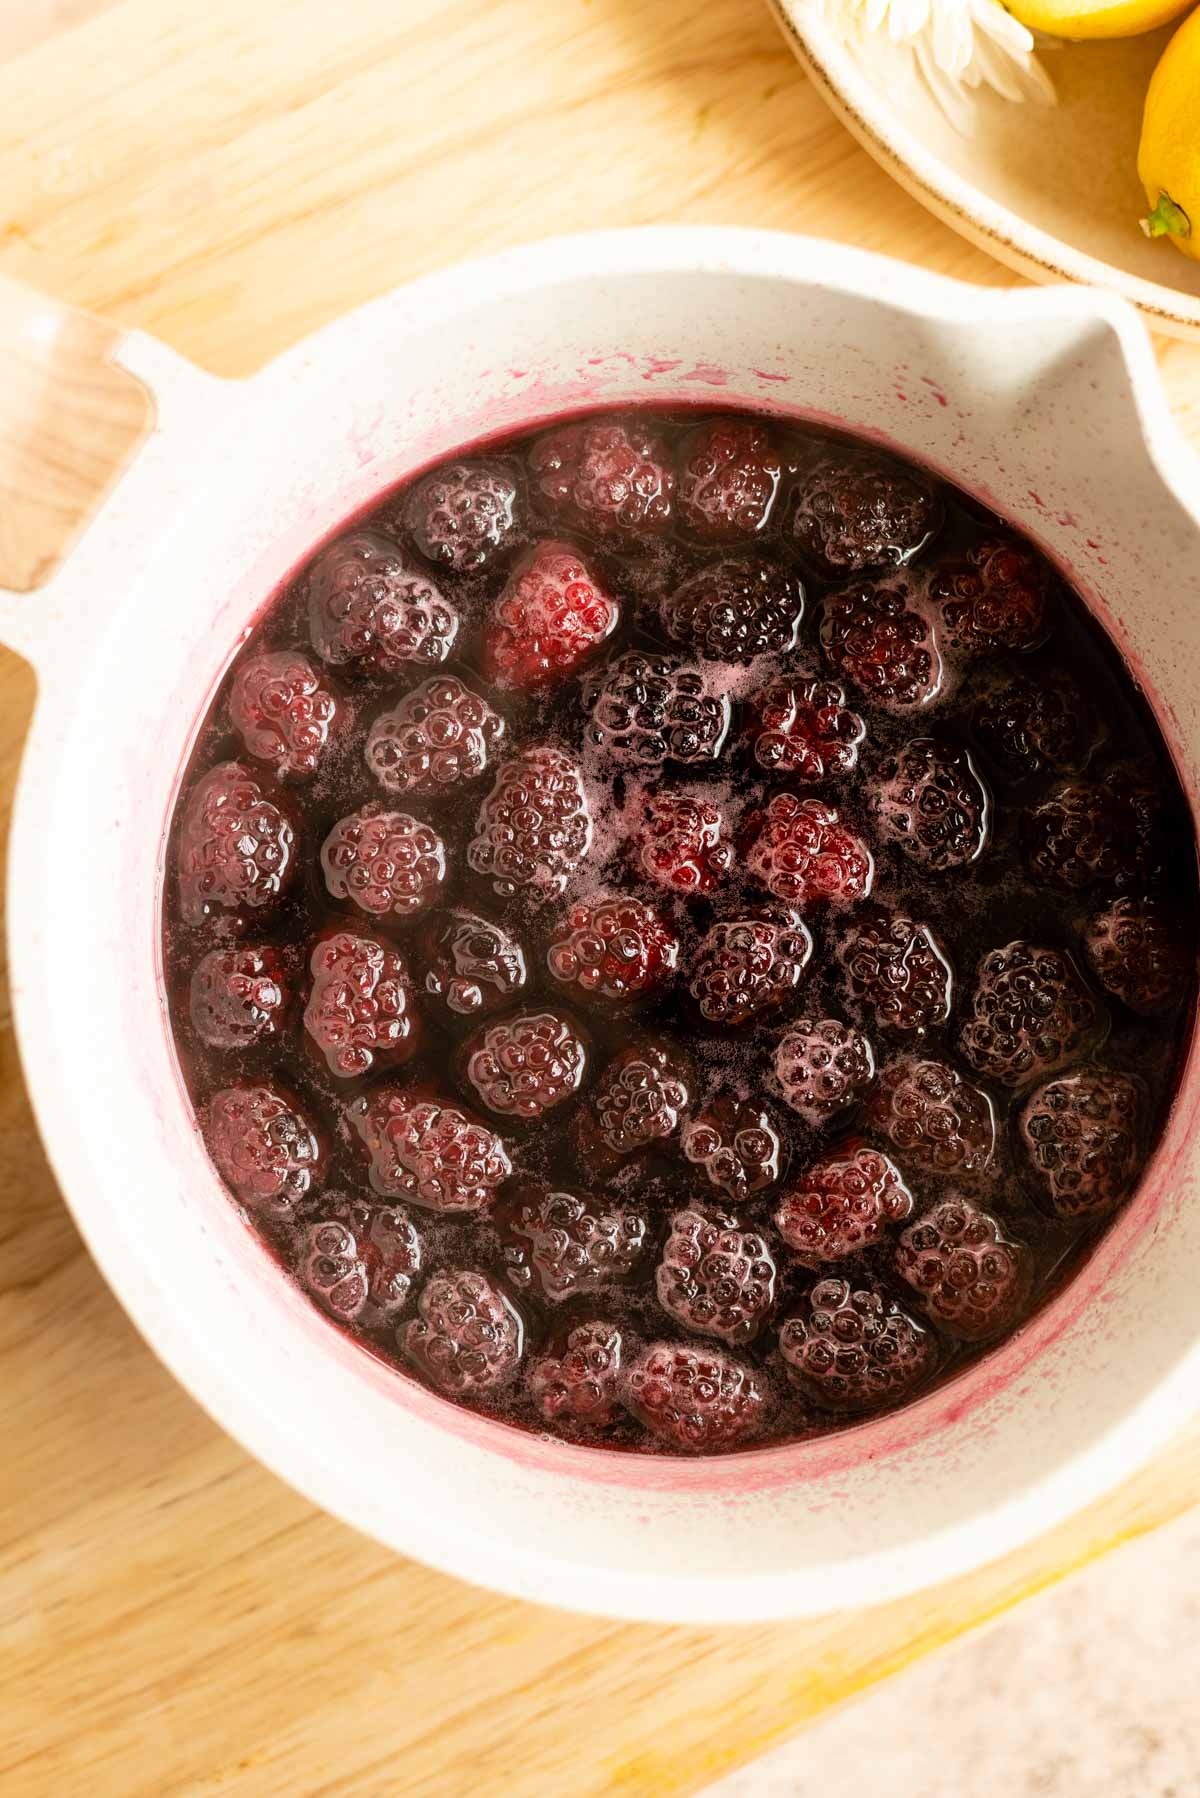 The Cooked blackberries sitting in a small pot.